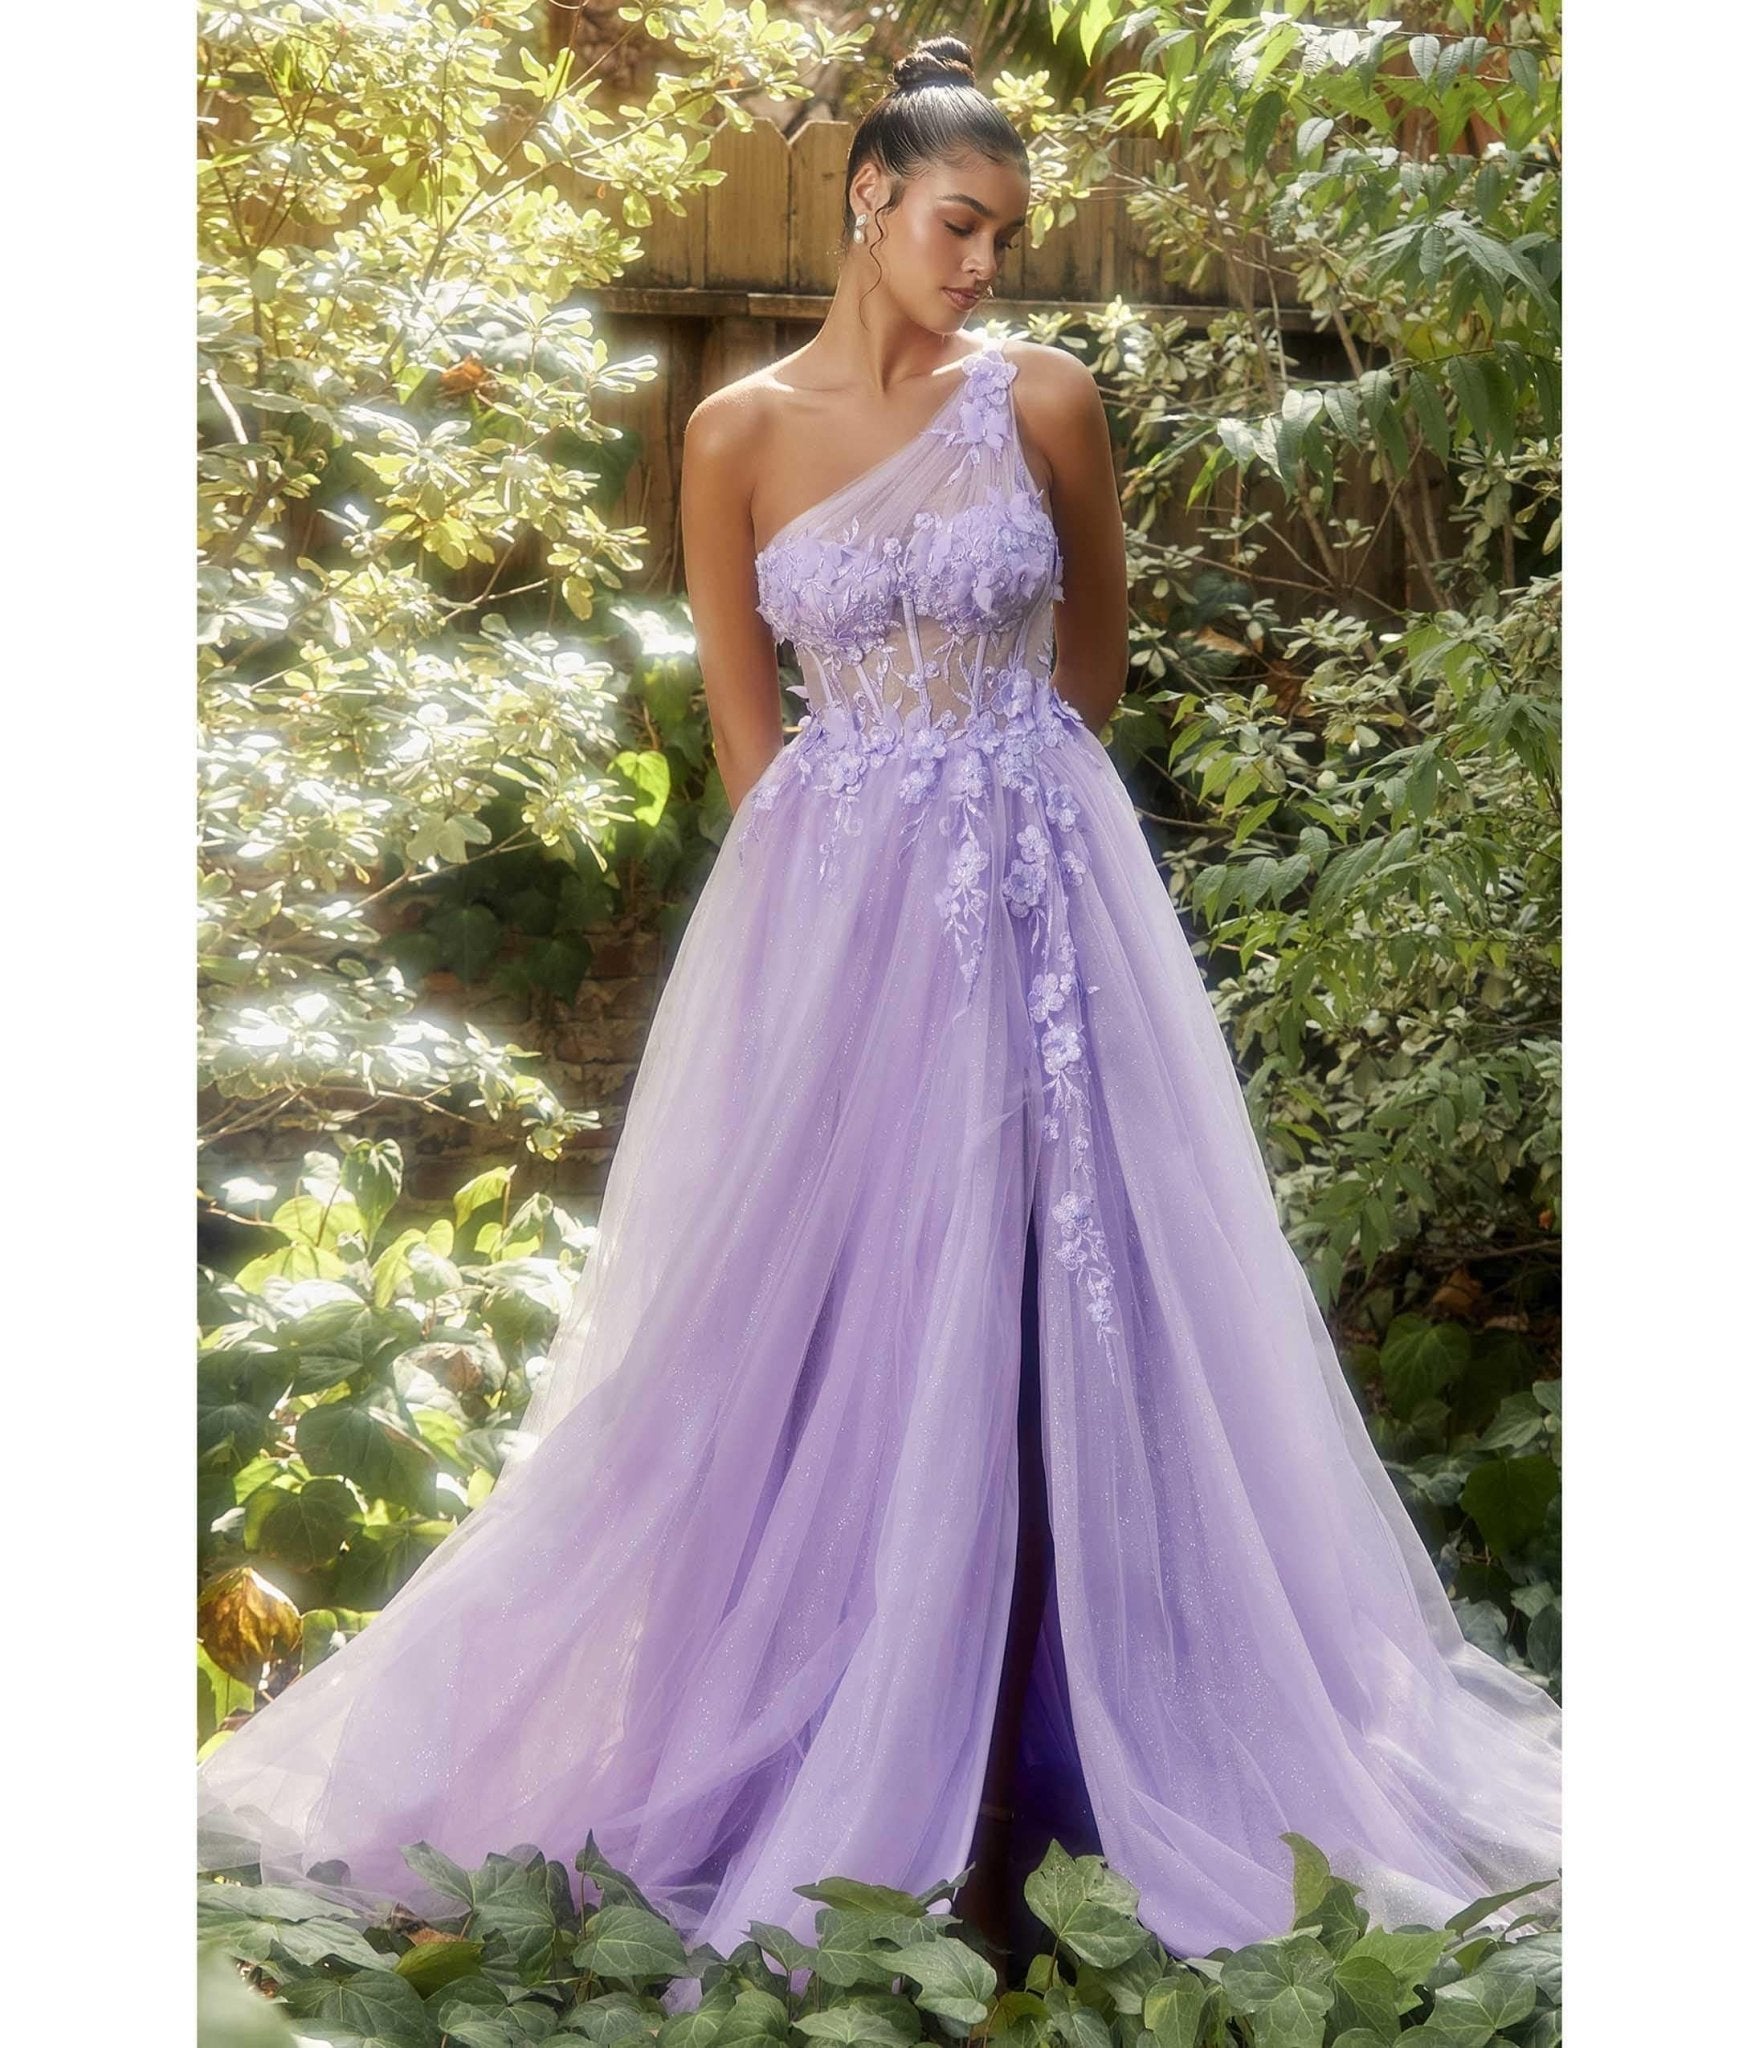 Lavender Bridesmaid Dresses: Charming Look For Girls